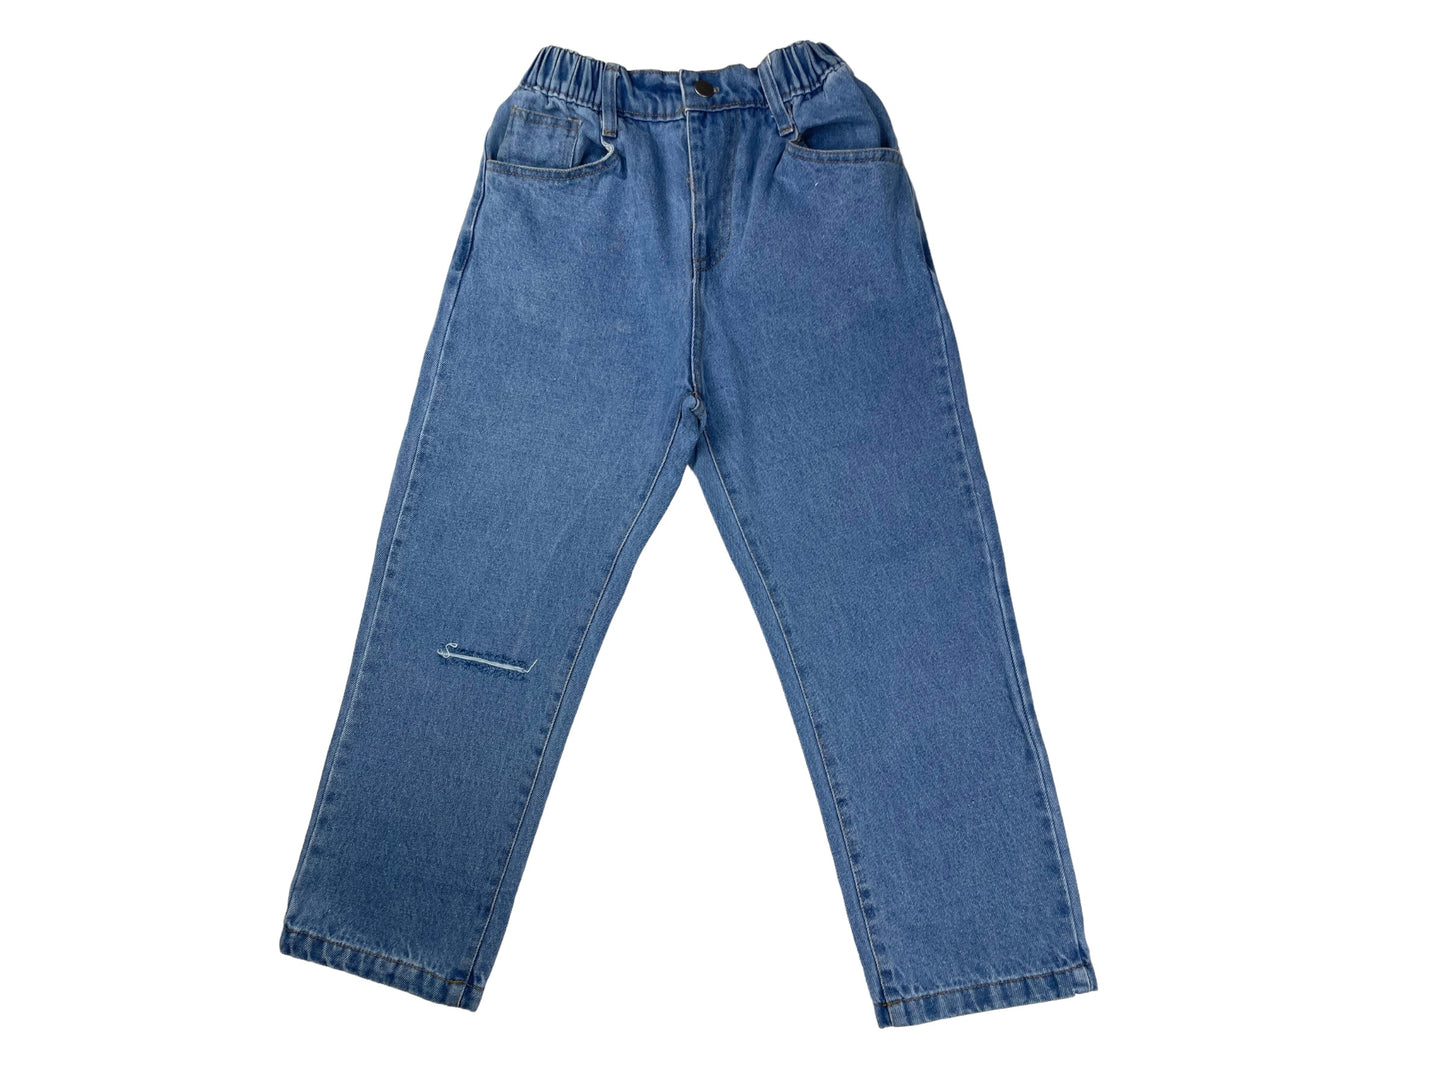 Cool kid jeans